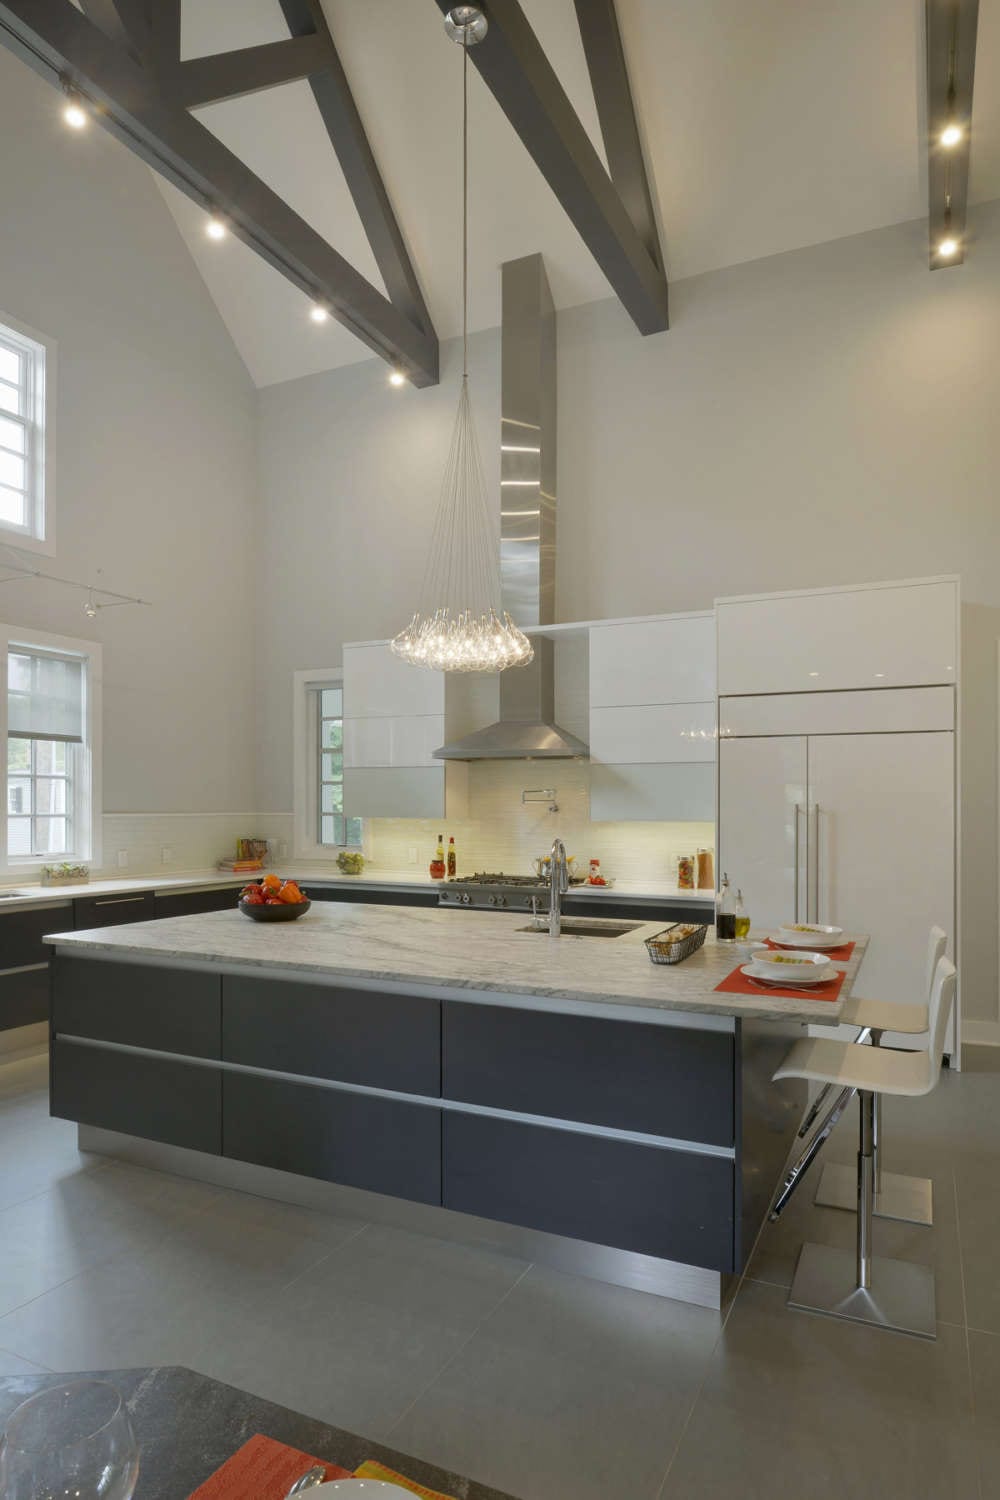 Base cabinets, center island and breakfast nook of contemporary kitchen feature alumasteel accents and toe kick.